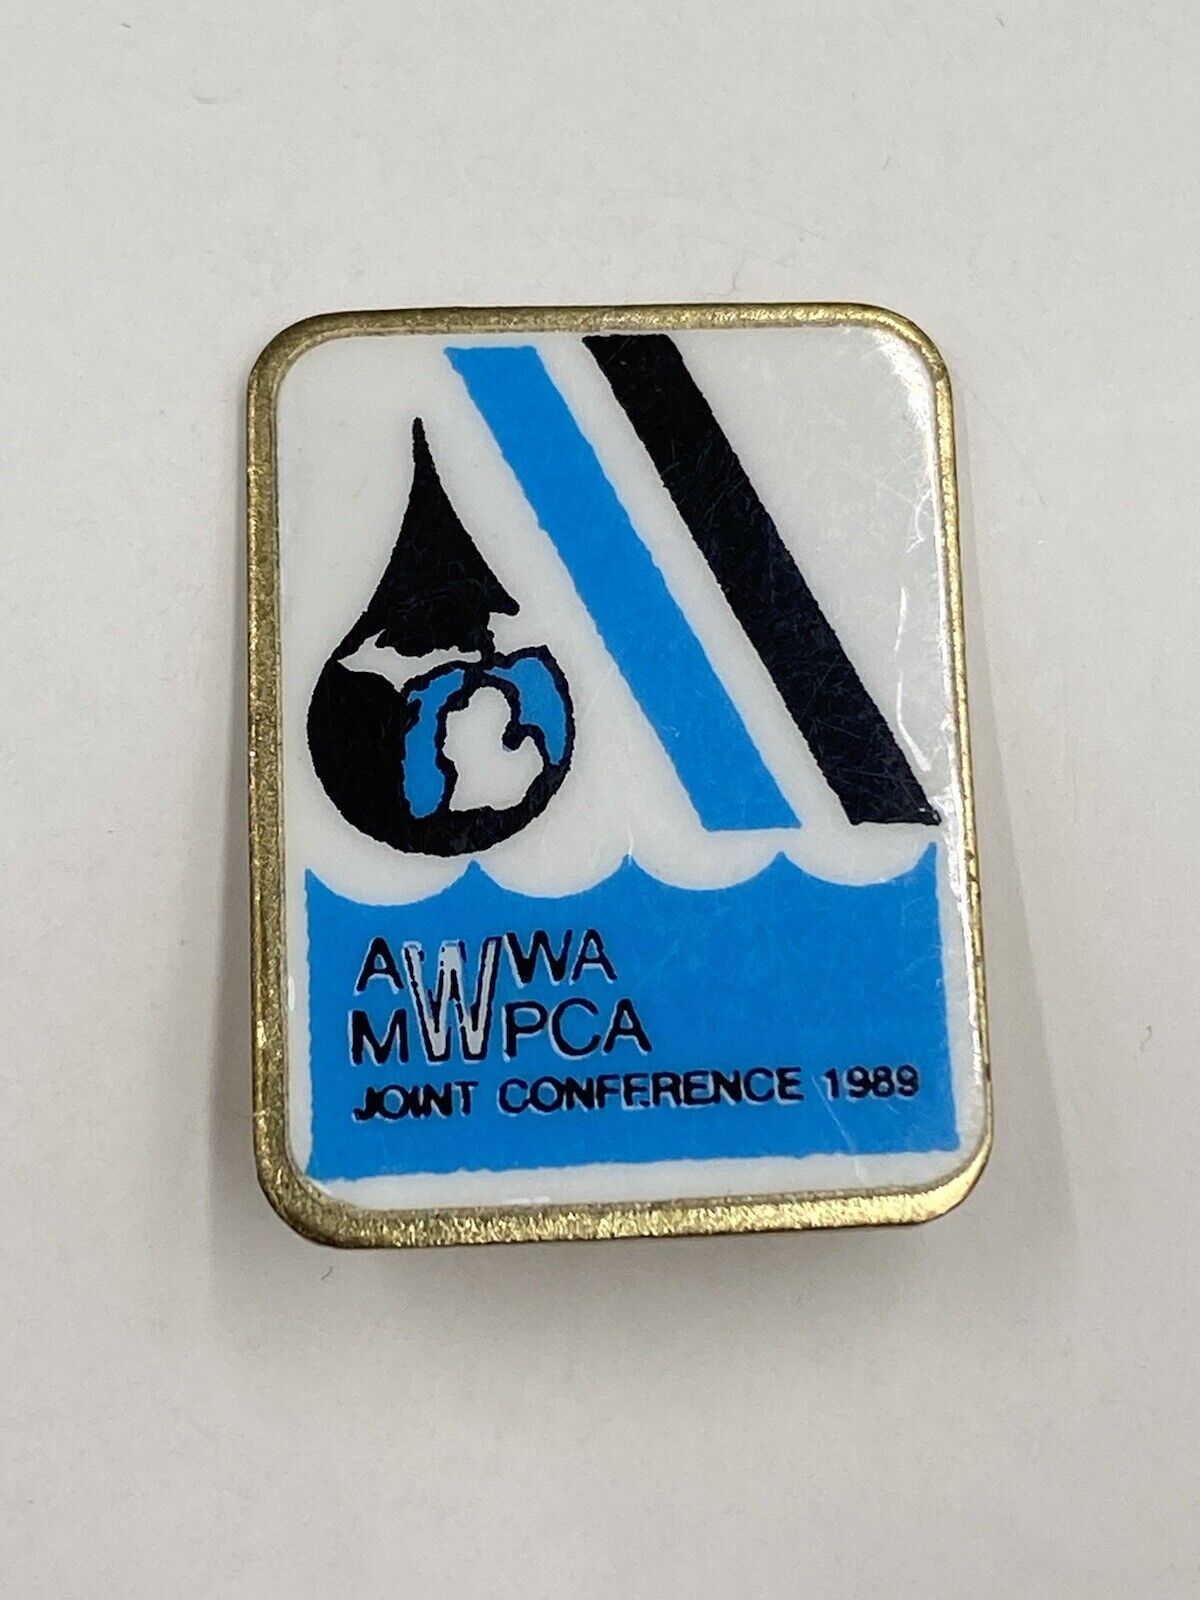 Vintage AWWA MWPCA Joint Conference 1989 Lapel Pin Brooch